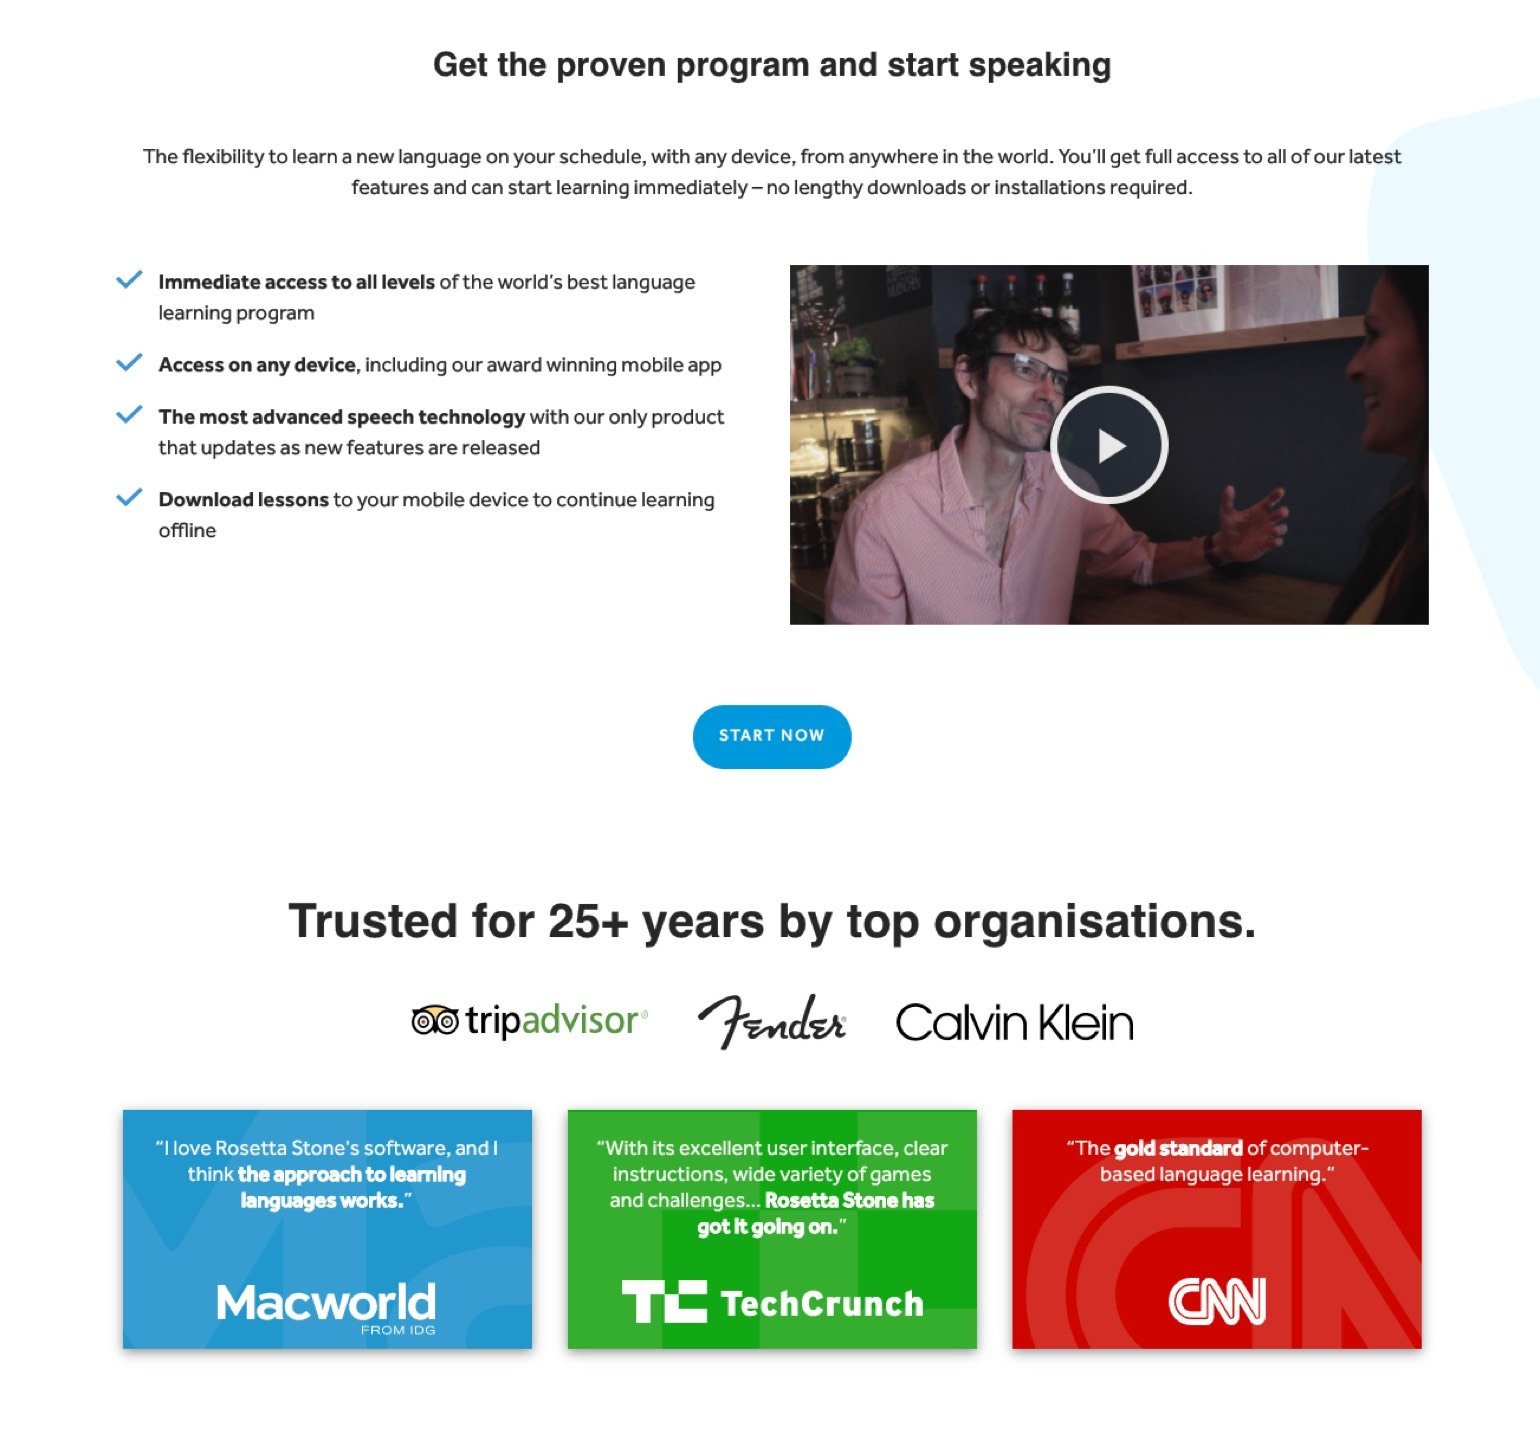 rosetta stone landing page media mentions social proof example